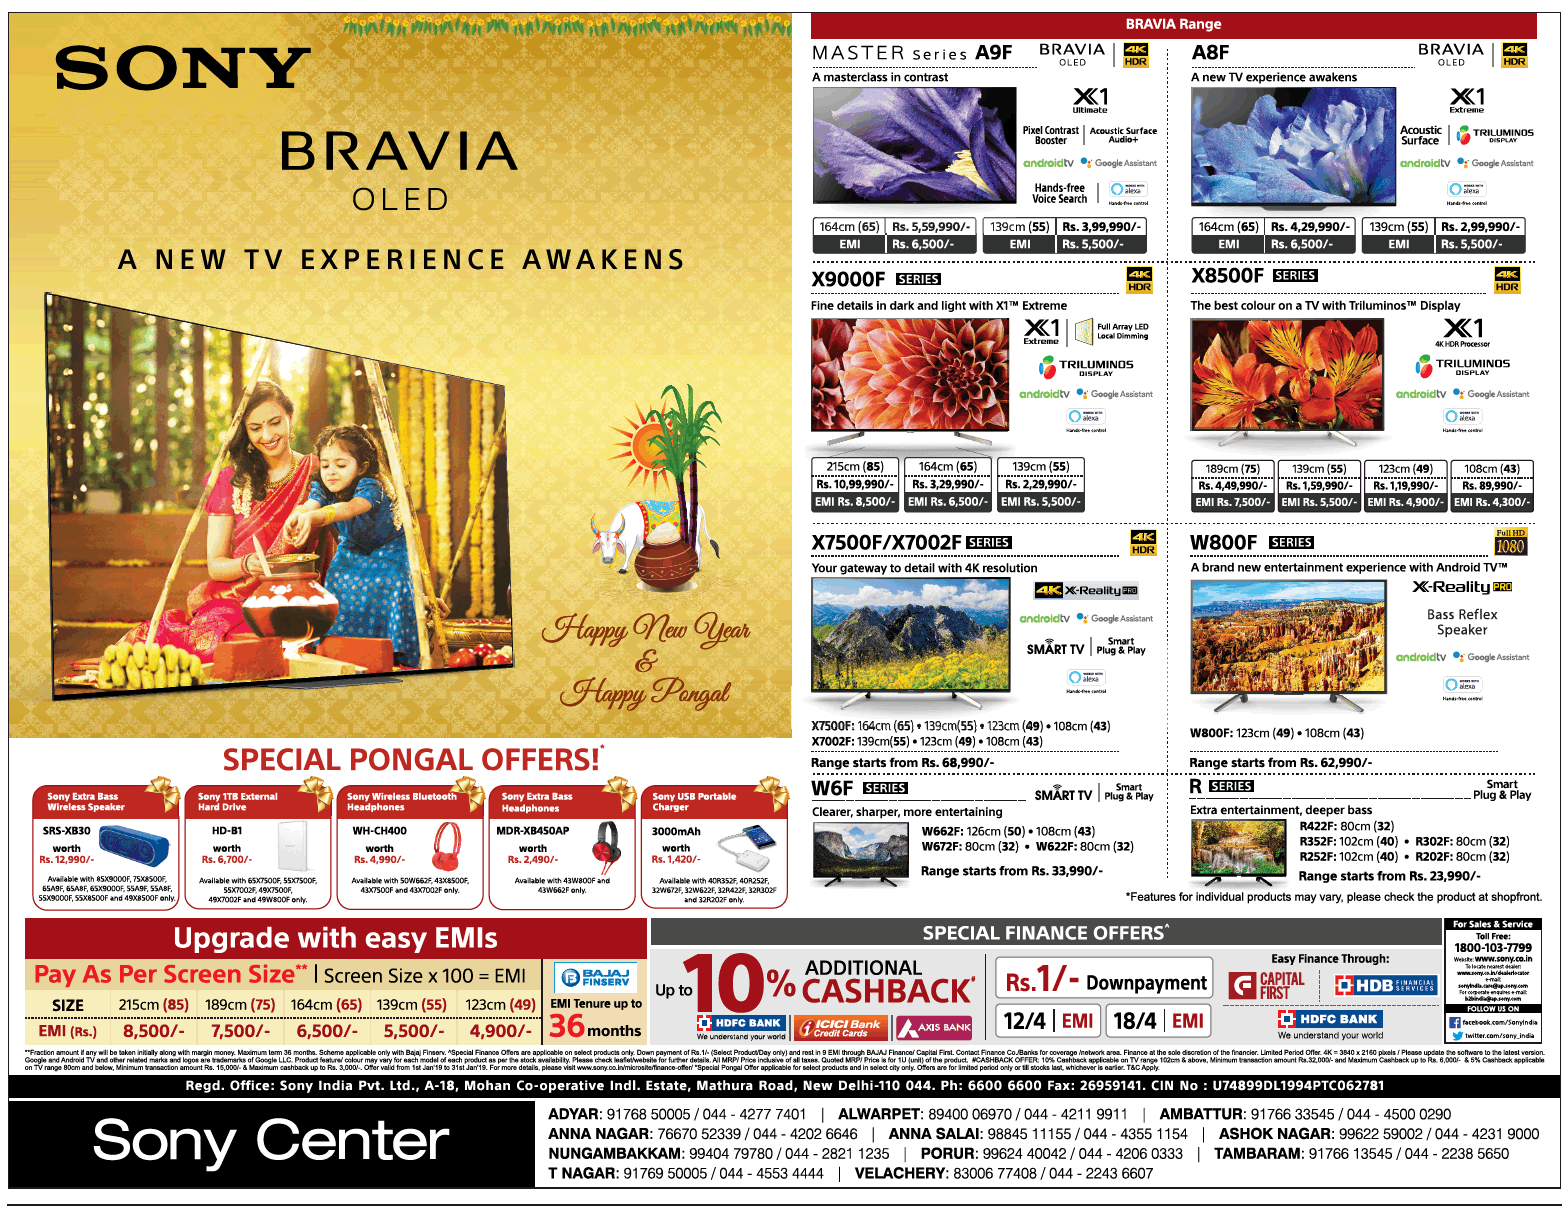 sony-bravia-oled-new-tv-experience-awakens-ad-times-of-india-chennai-01-01-2019.png